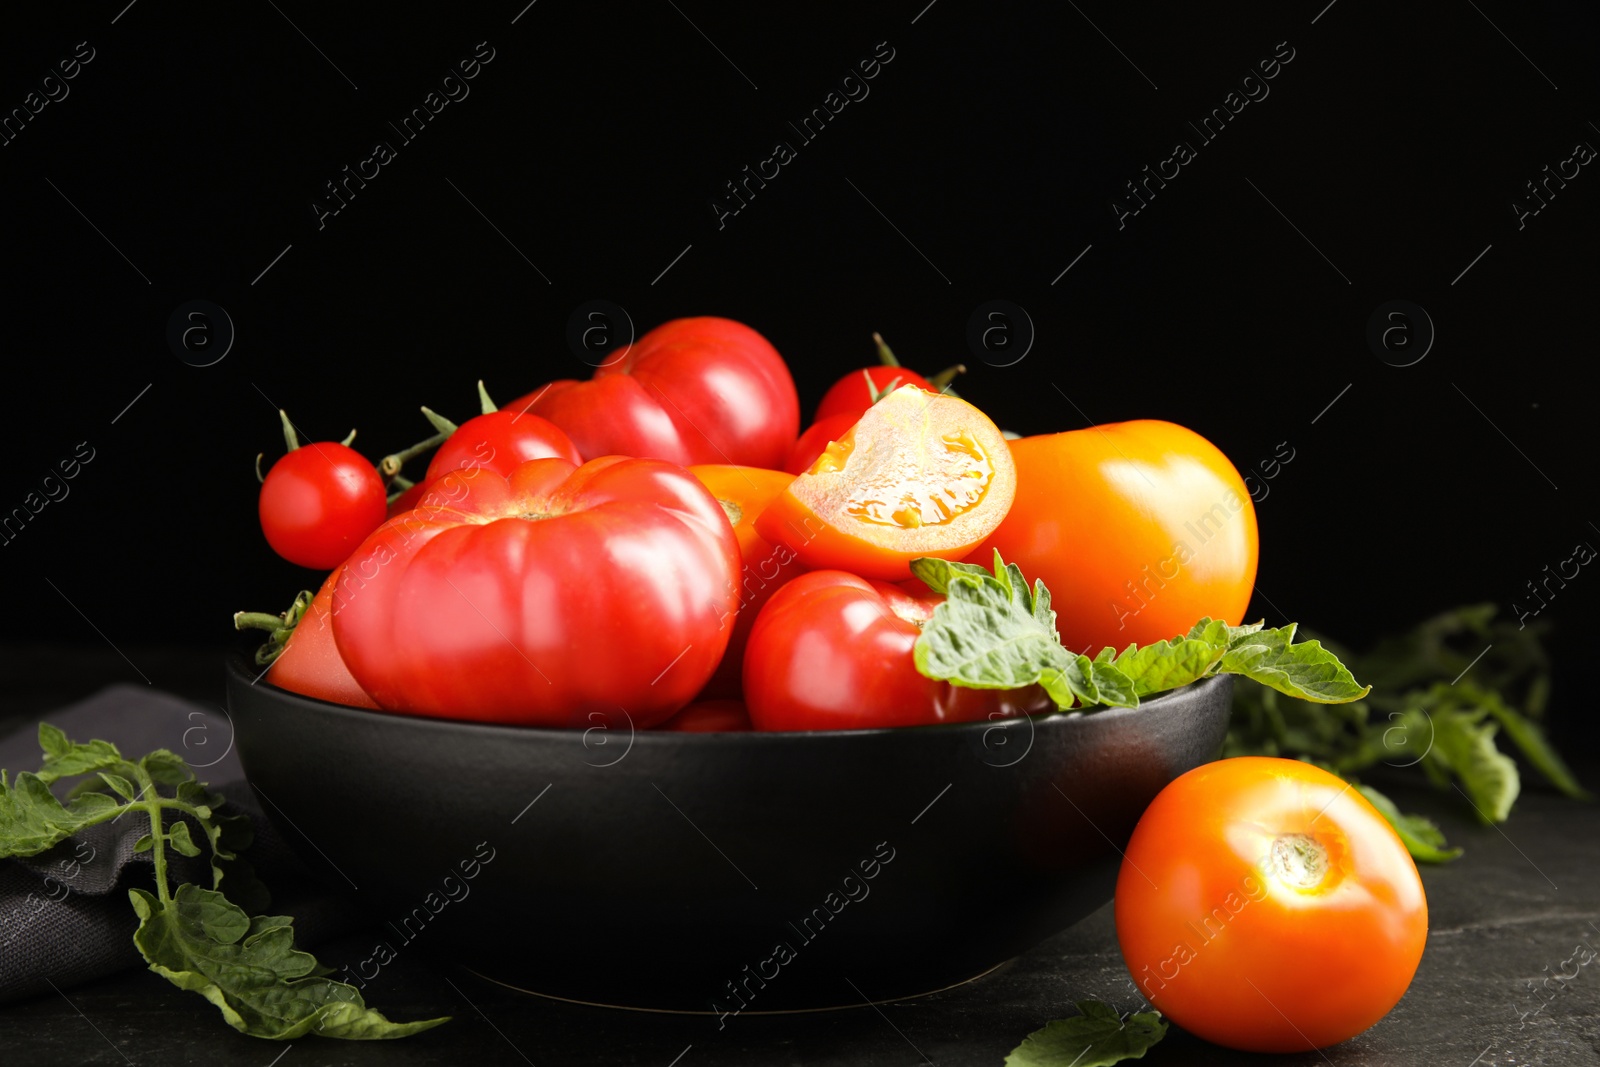 Photo of Many different ripe tomatoes with leaves on black table